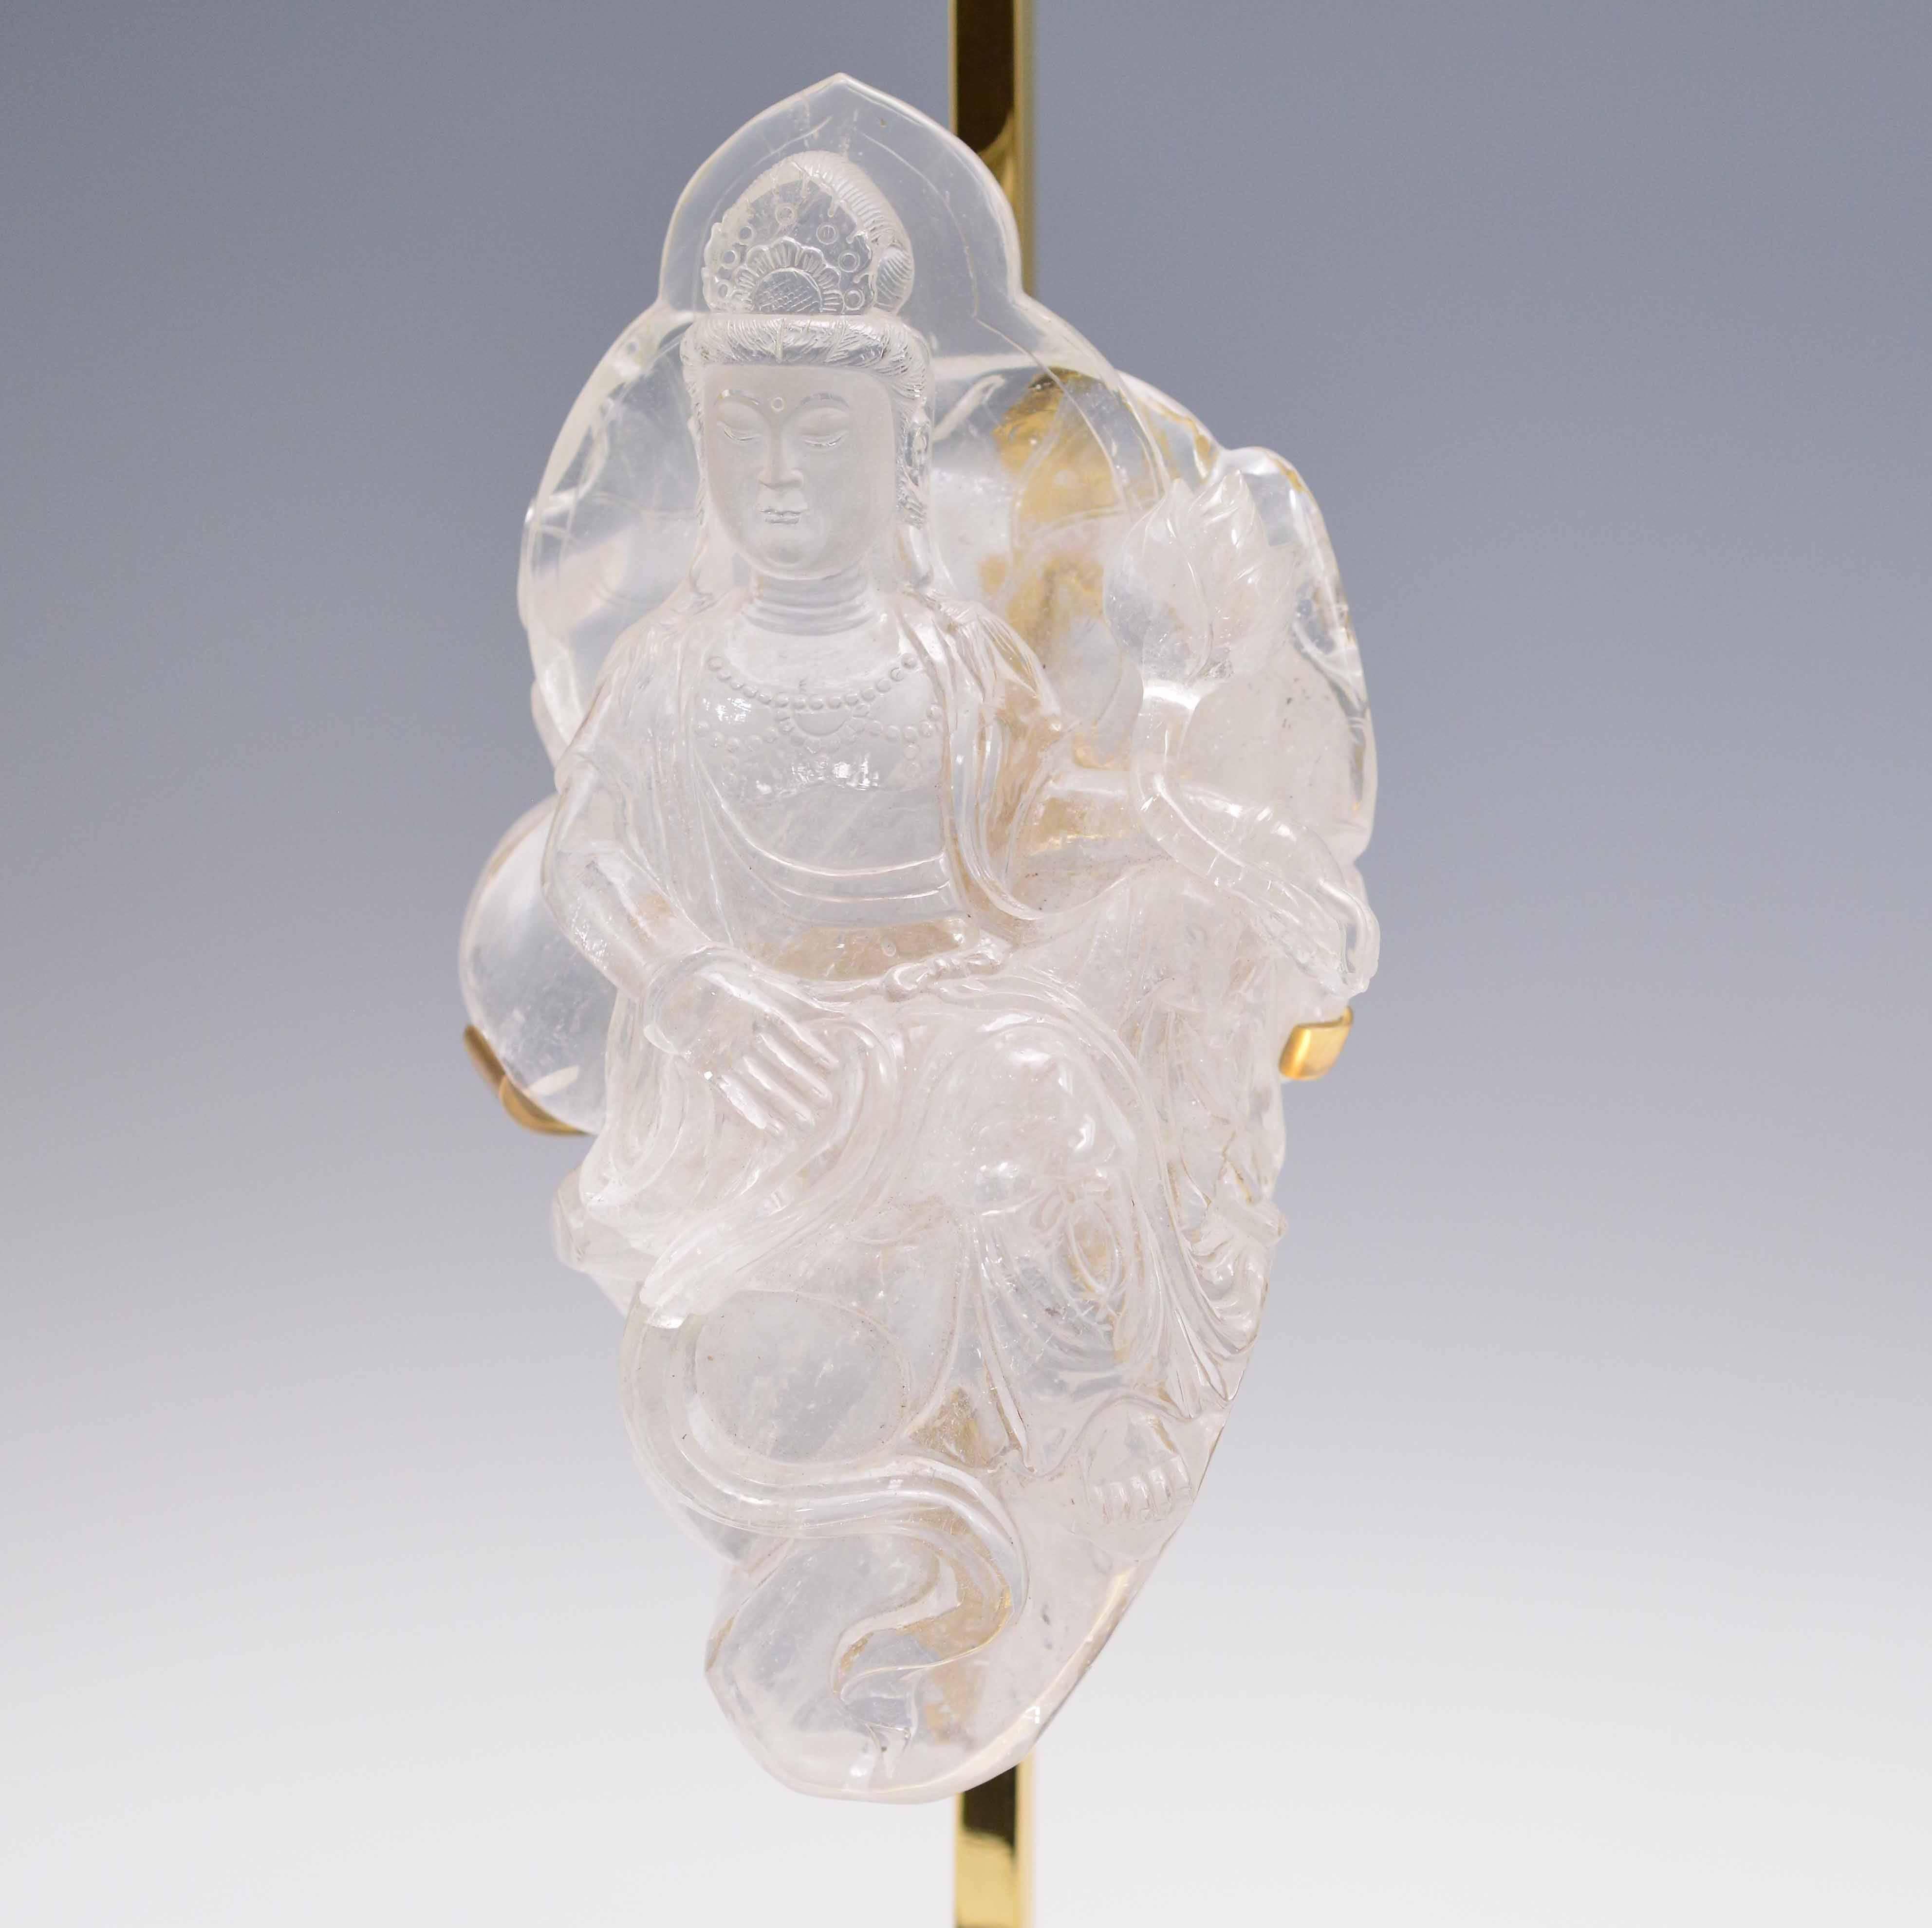 A fine carved rock crystal quartz of Bodhisattva with a lotus flower in custom-made polish brass bases, created by Phoenix Gallery, NYC.
Available in nickel plating and antique brass finished. 
To the rock crystal: 15